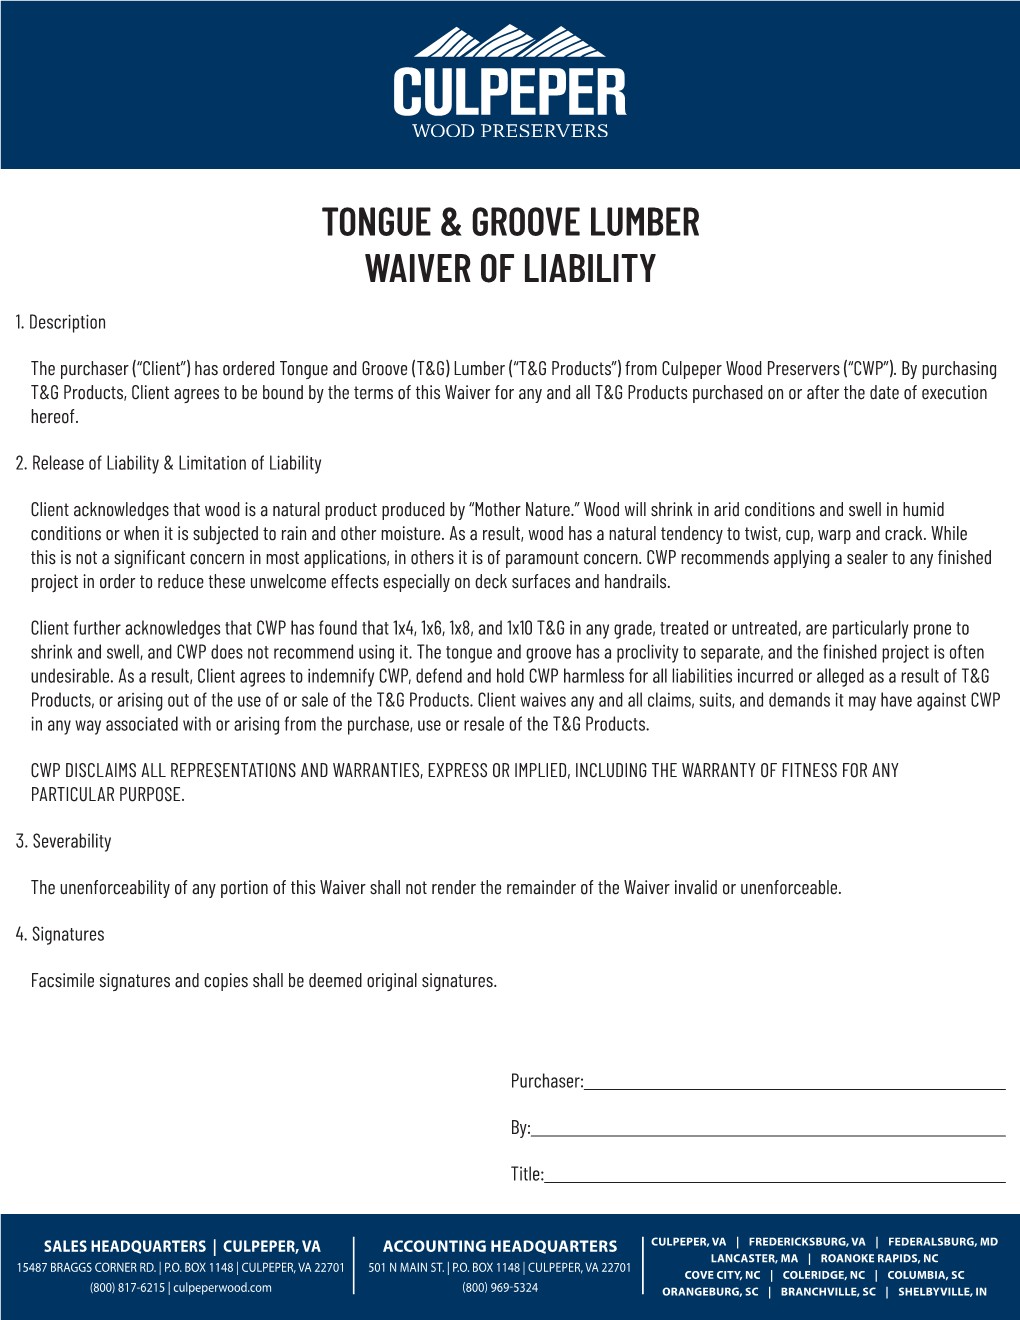 Tongue & Groove Lumber Waiver of Liability